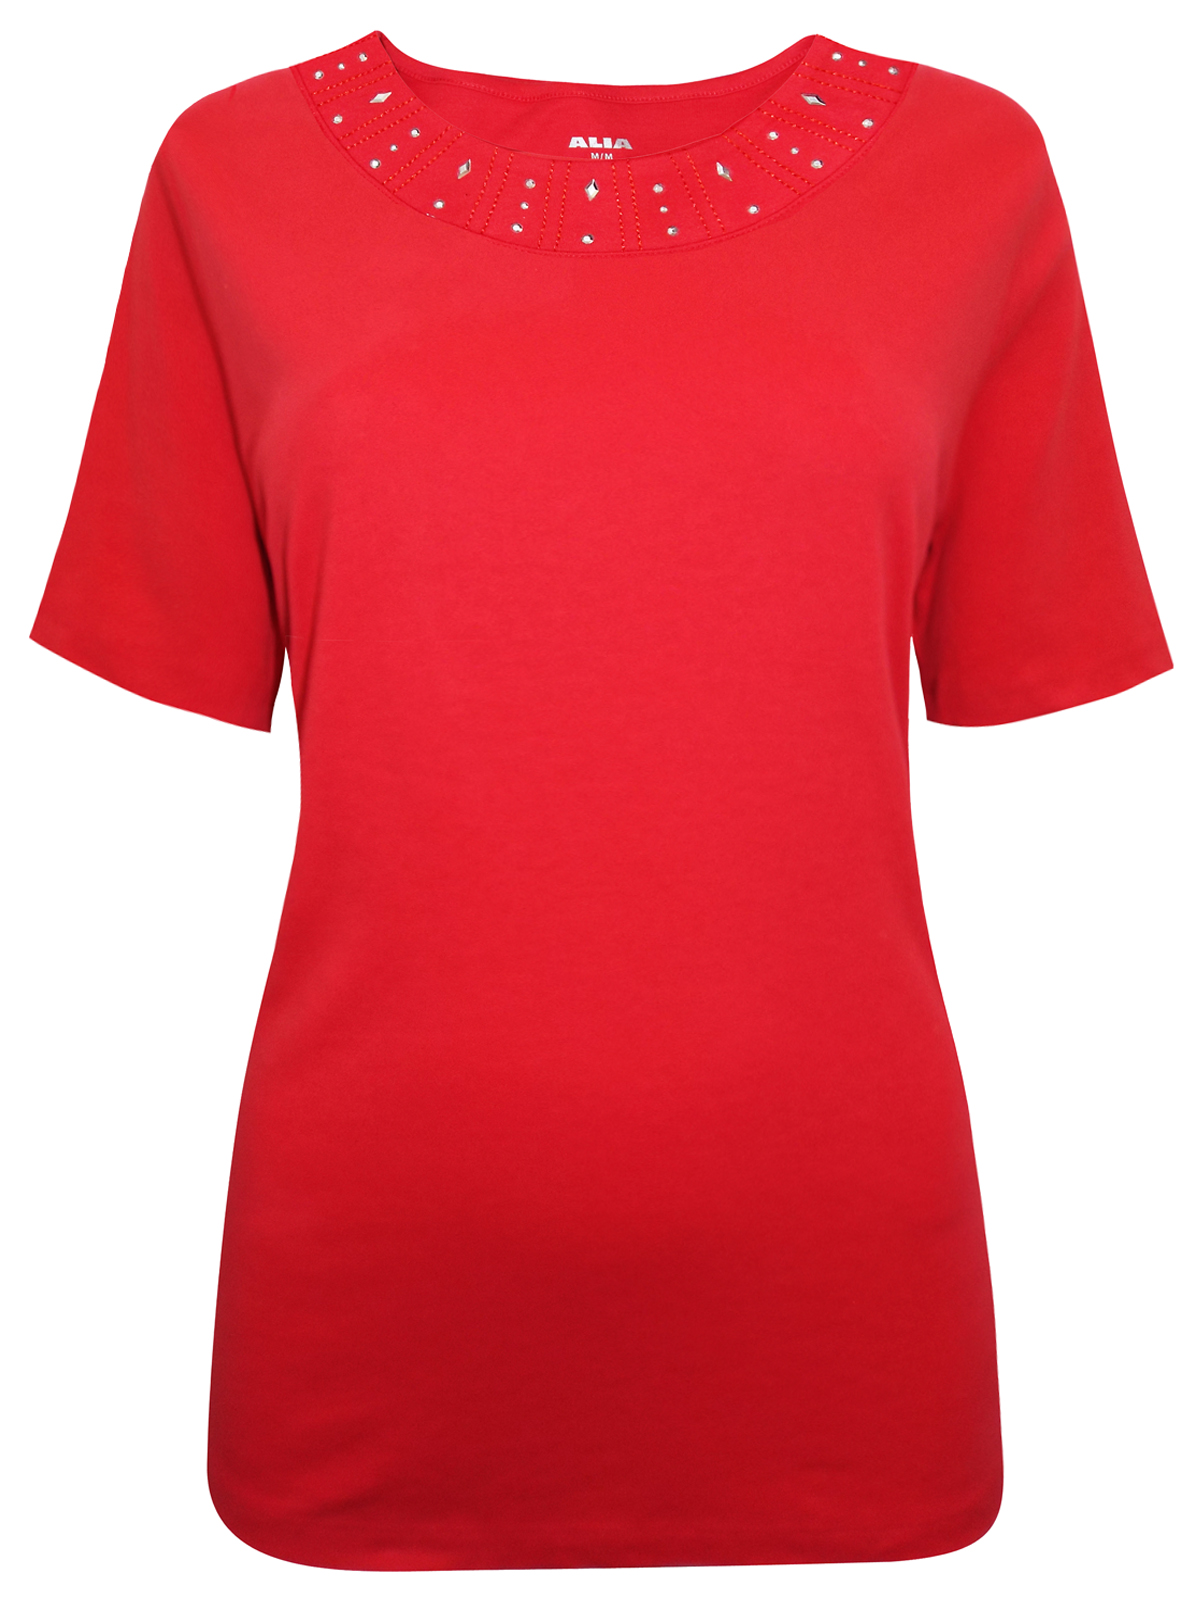 Alia - - Alia RED Cotton Rich Embellished Top - Size 8/10 to 24/26 ...